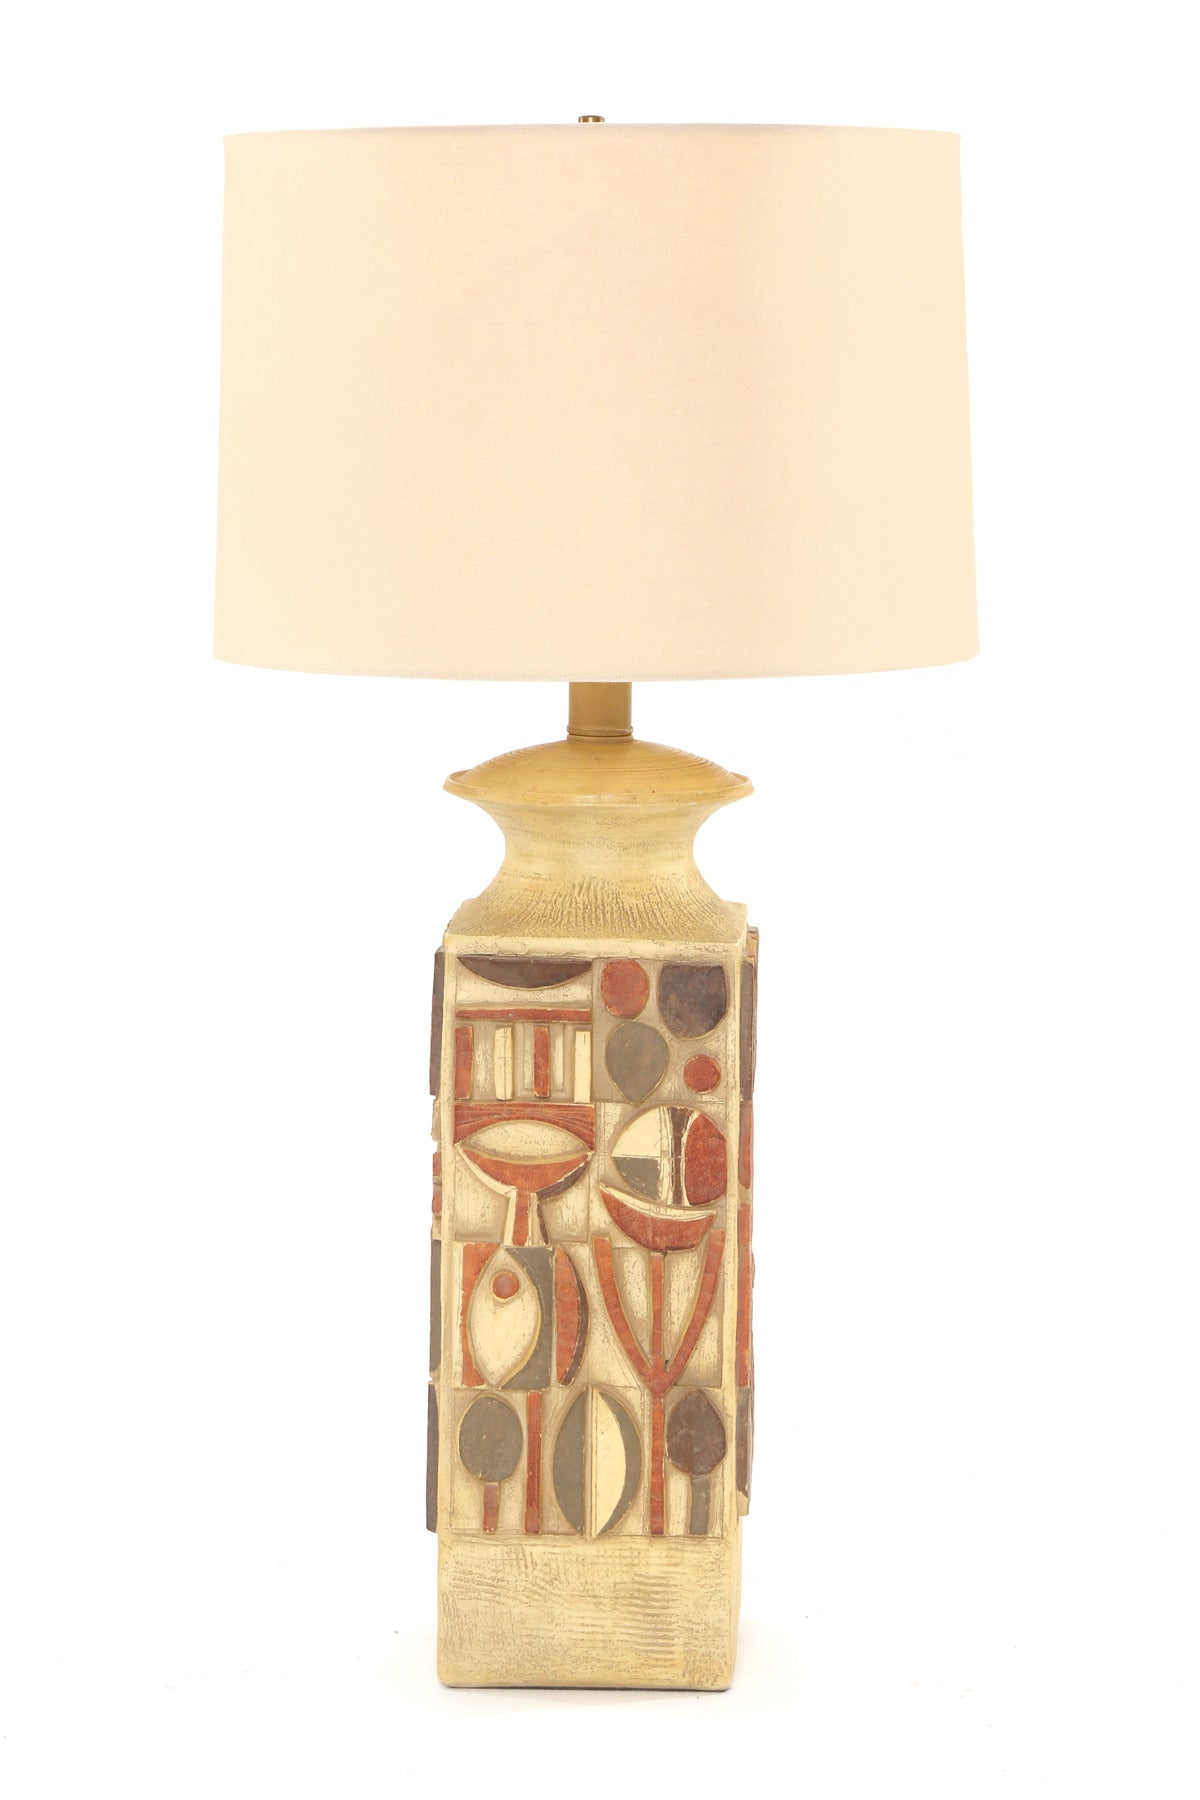 Large-scale cubist plaster table lamp, circa late 1960s. This intricate example blends earth tone glazing with fabulous forms. Price is without shade. Height listed is to the top of the socket.